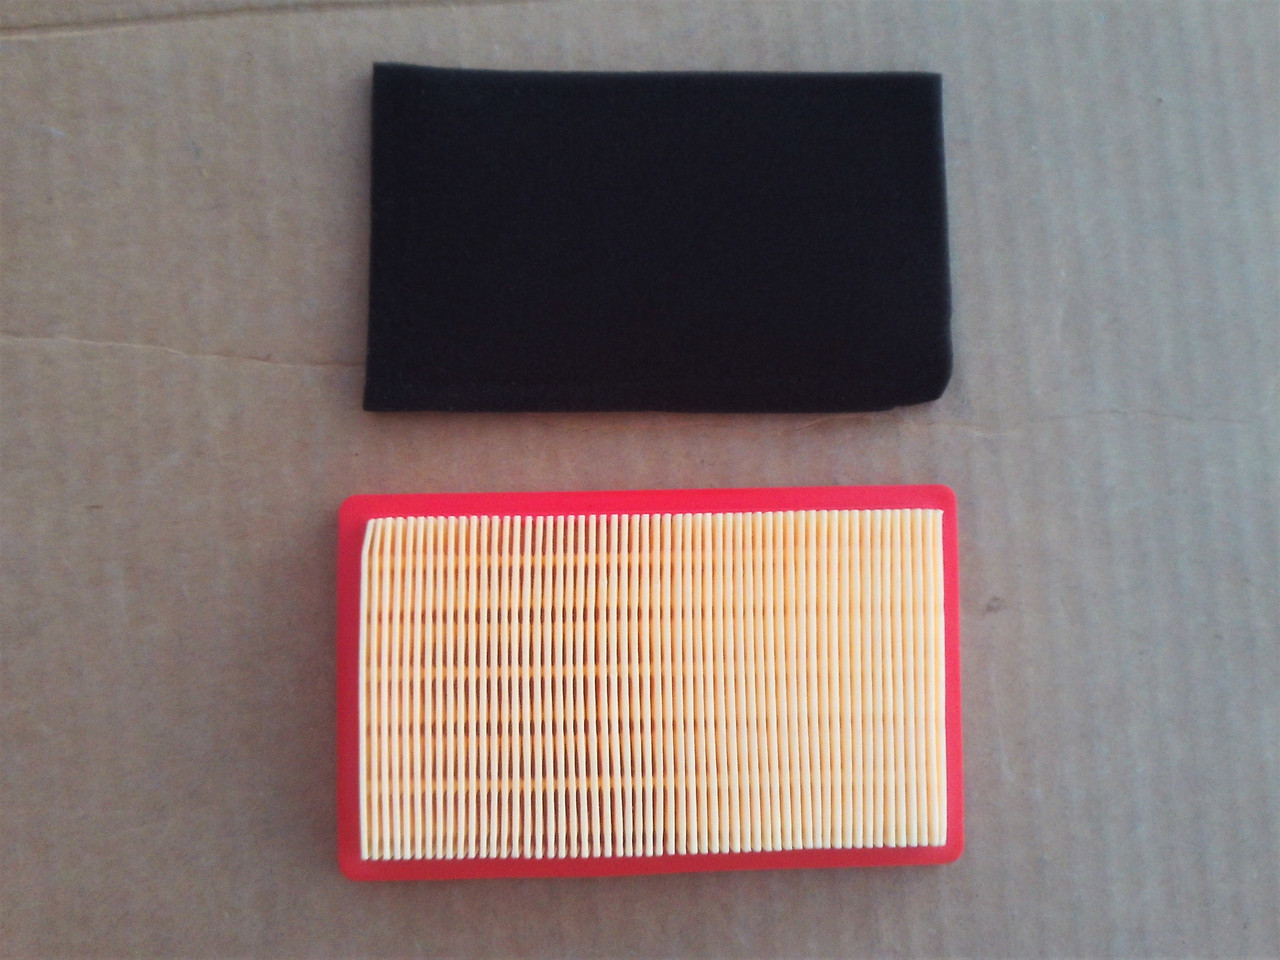 Air Filter for Kohler XT6, XT149, XT173, 1408301S, 1408301S1, 1408302S, 1408304S, 1408319S, 14 083 01-S, 14 083 01-S1, 14 083 02-S, 14 083 04-S, 14 083 19-S, includes foam pre cleaner